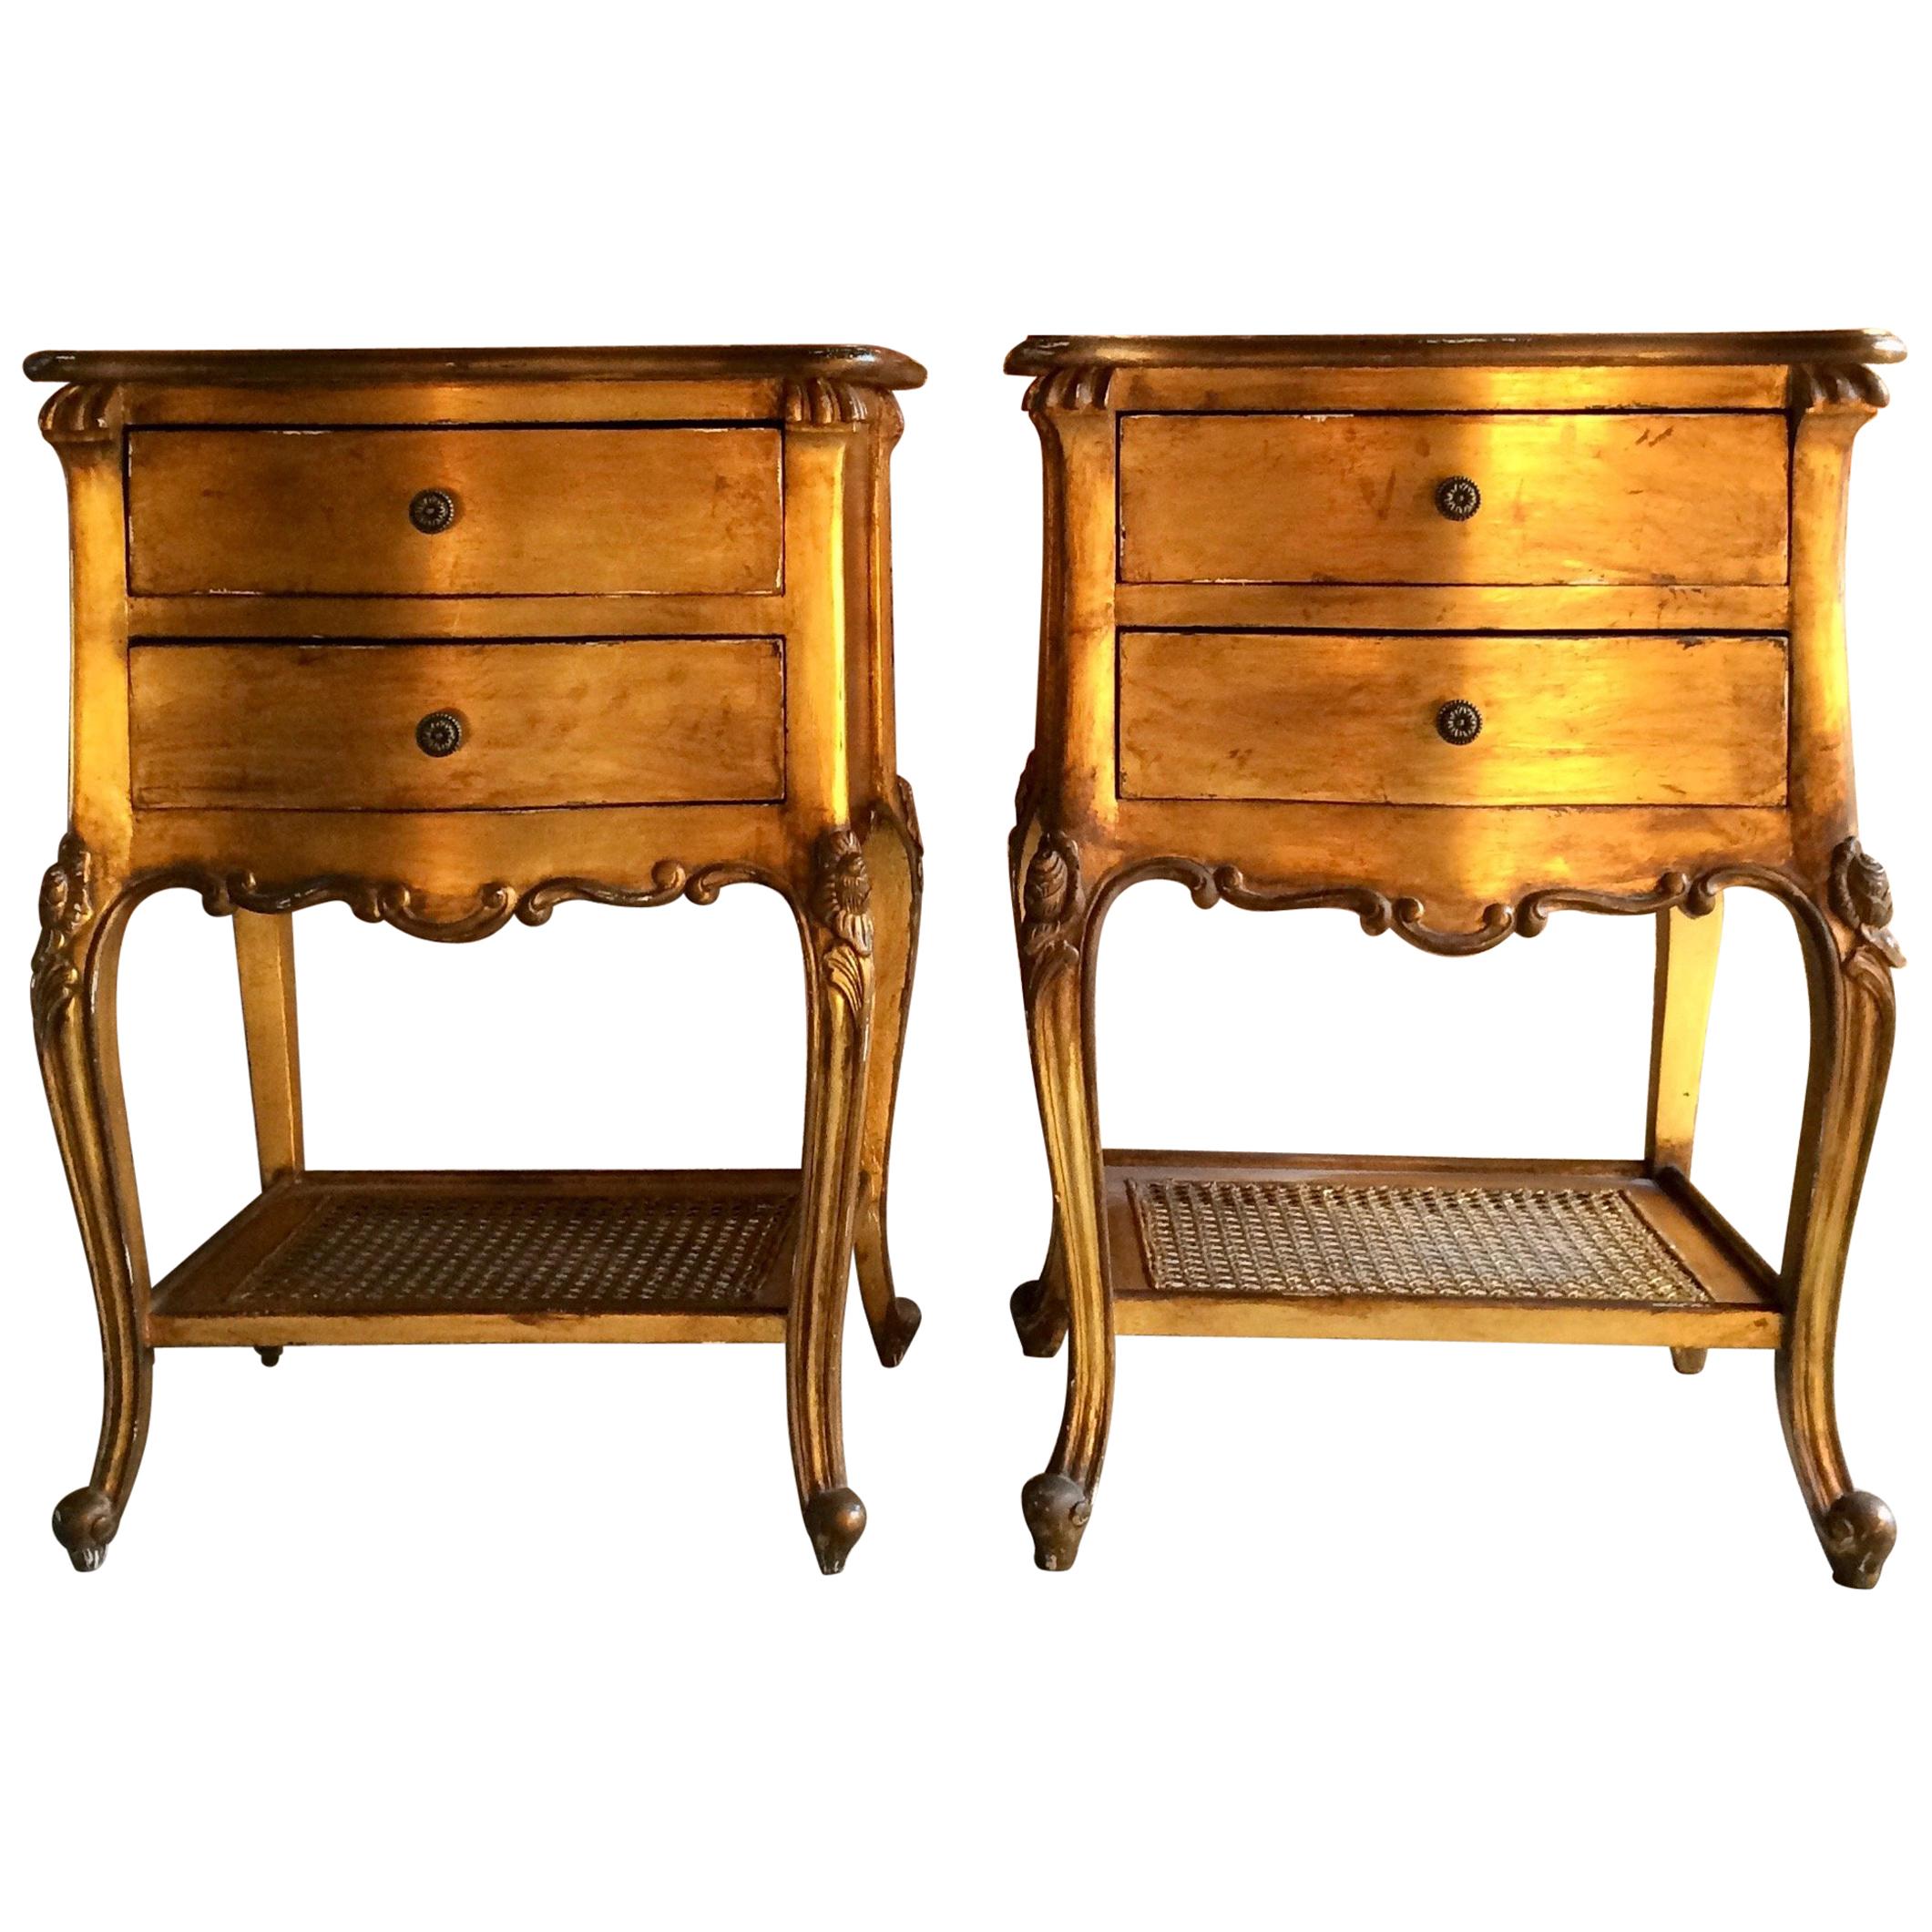 French Bedside Cabinets Nightstands Gilded Tables, 20th Century